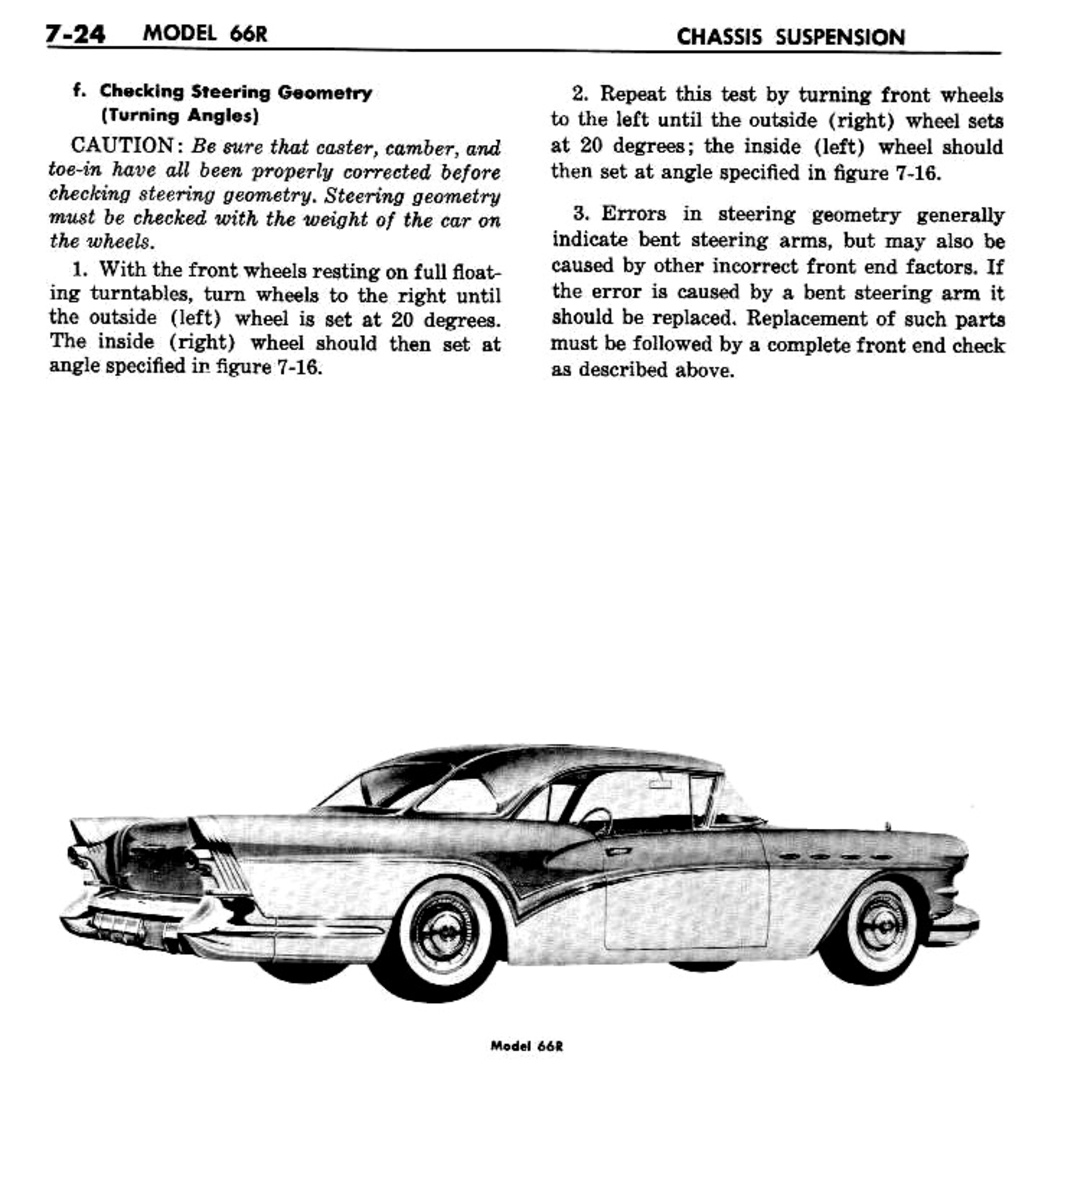 n_08 1957 Buick Shop Manual - Chassis Suspension-024-024.jpg